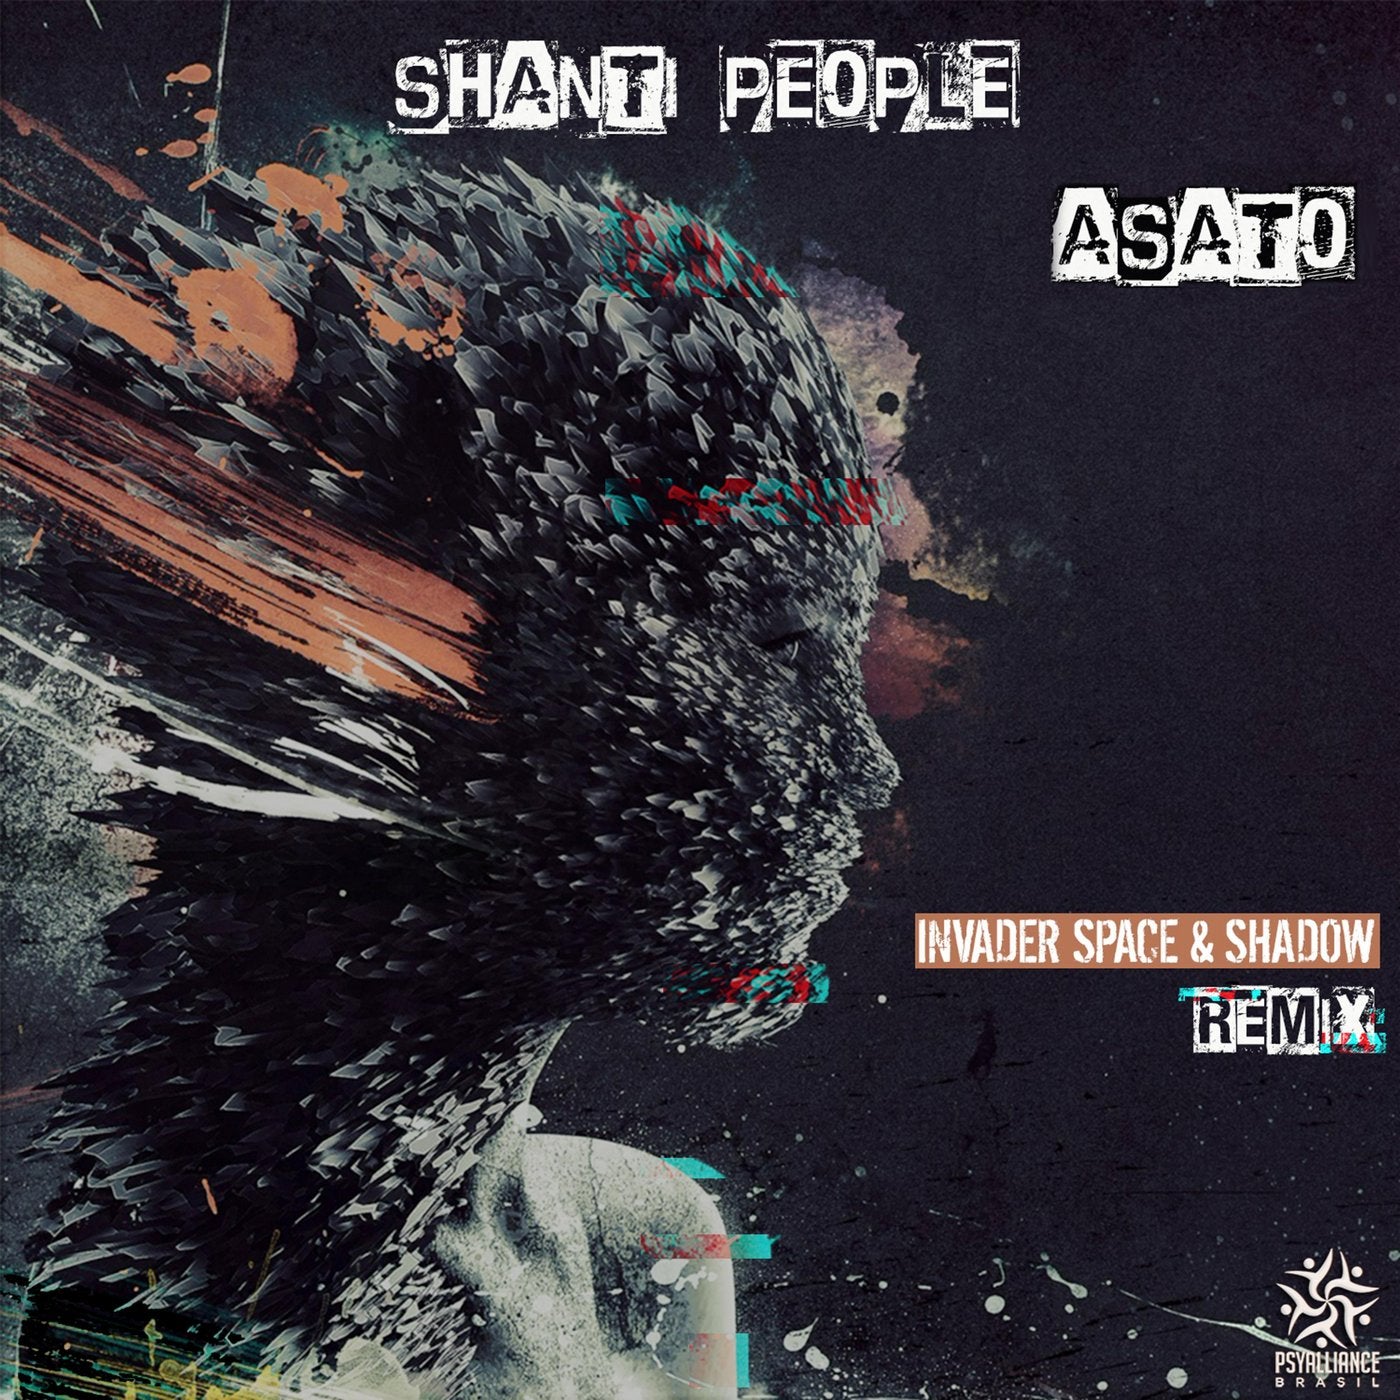 Asato (Invader Space & Shadow Remix)